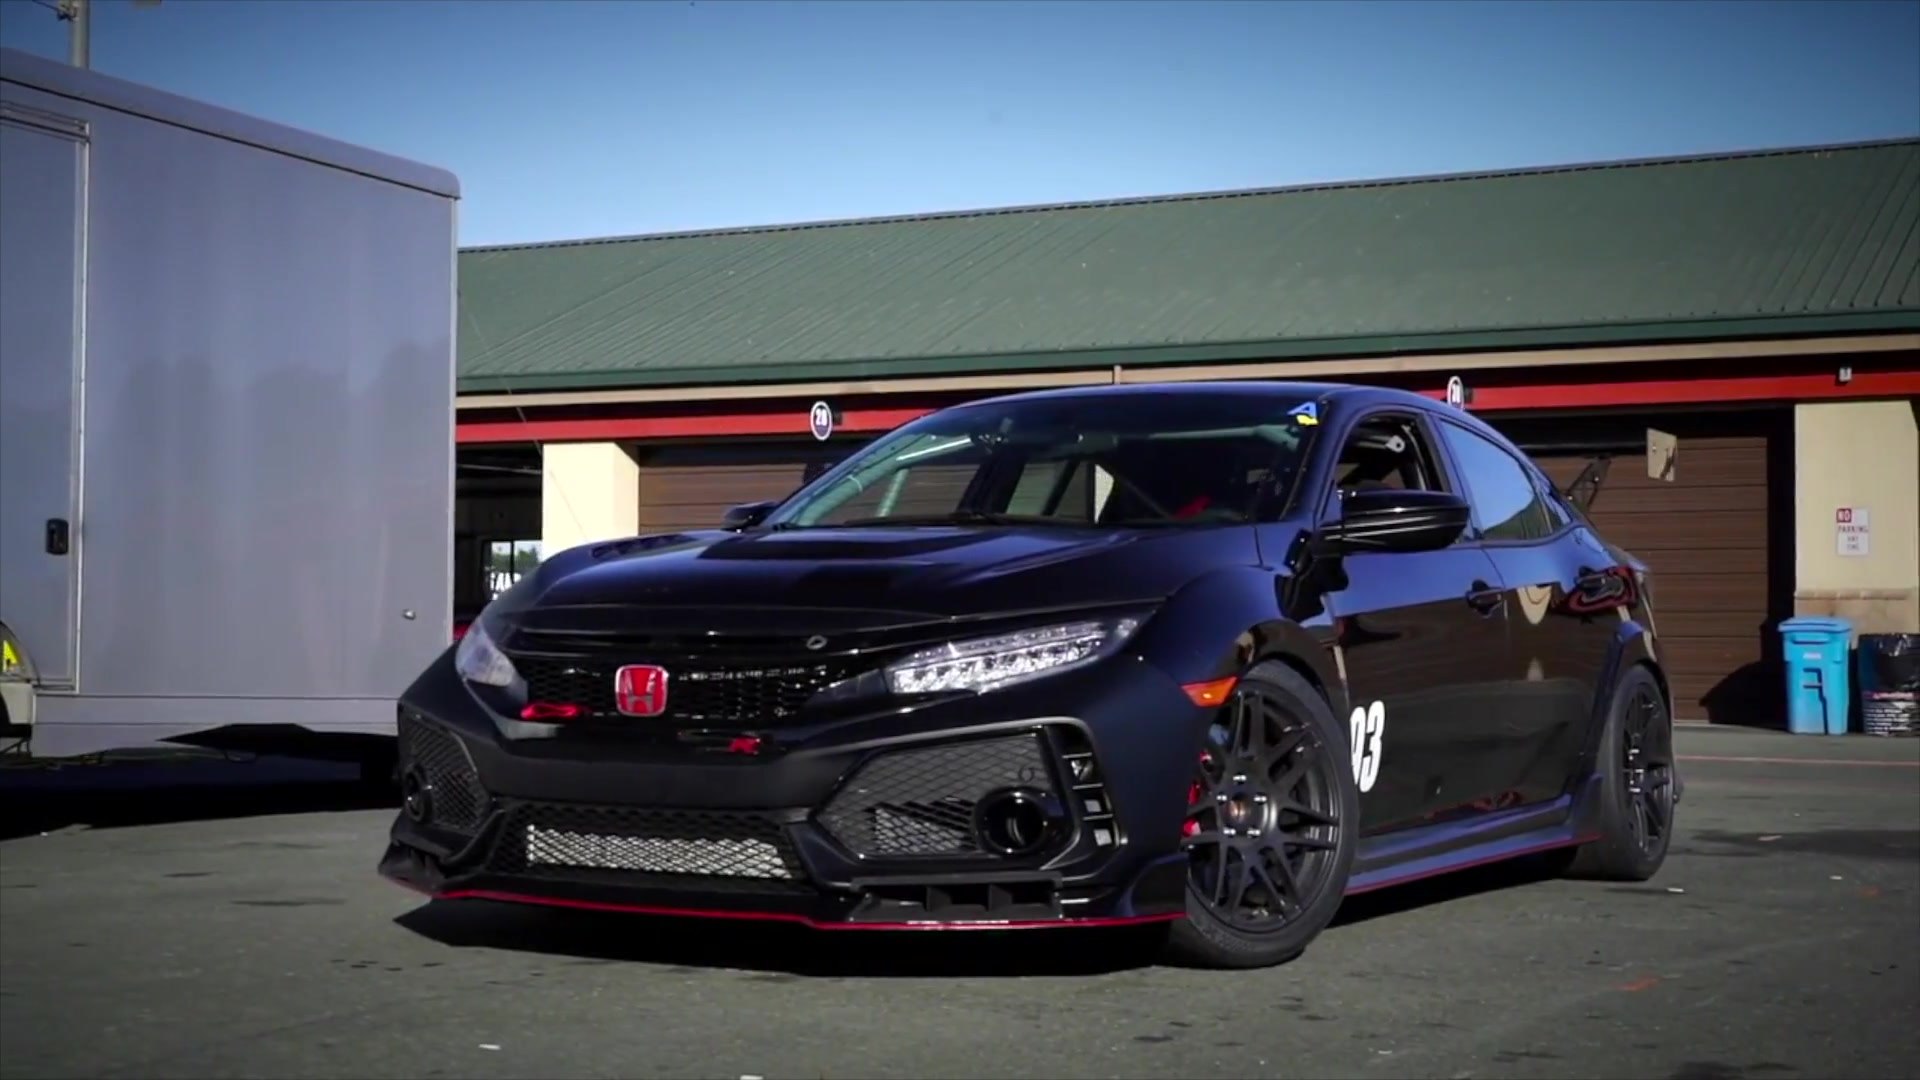 Attacking the Track in the Honda HPD Civic Type R TC Race Car